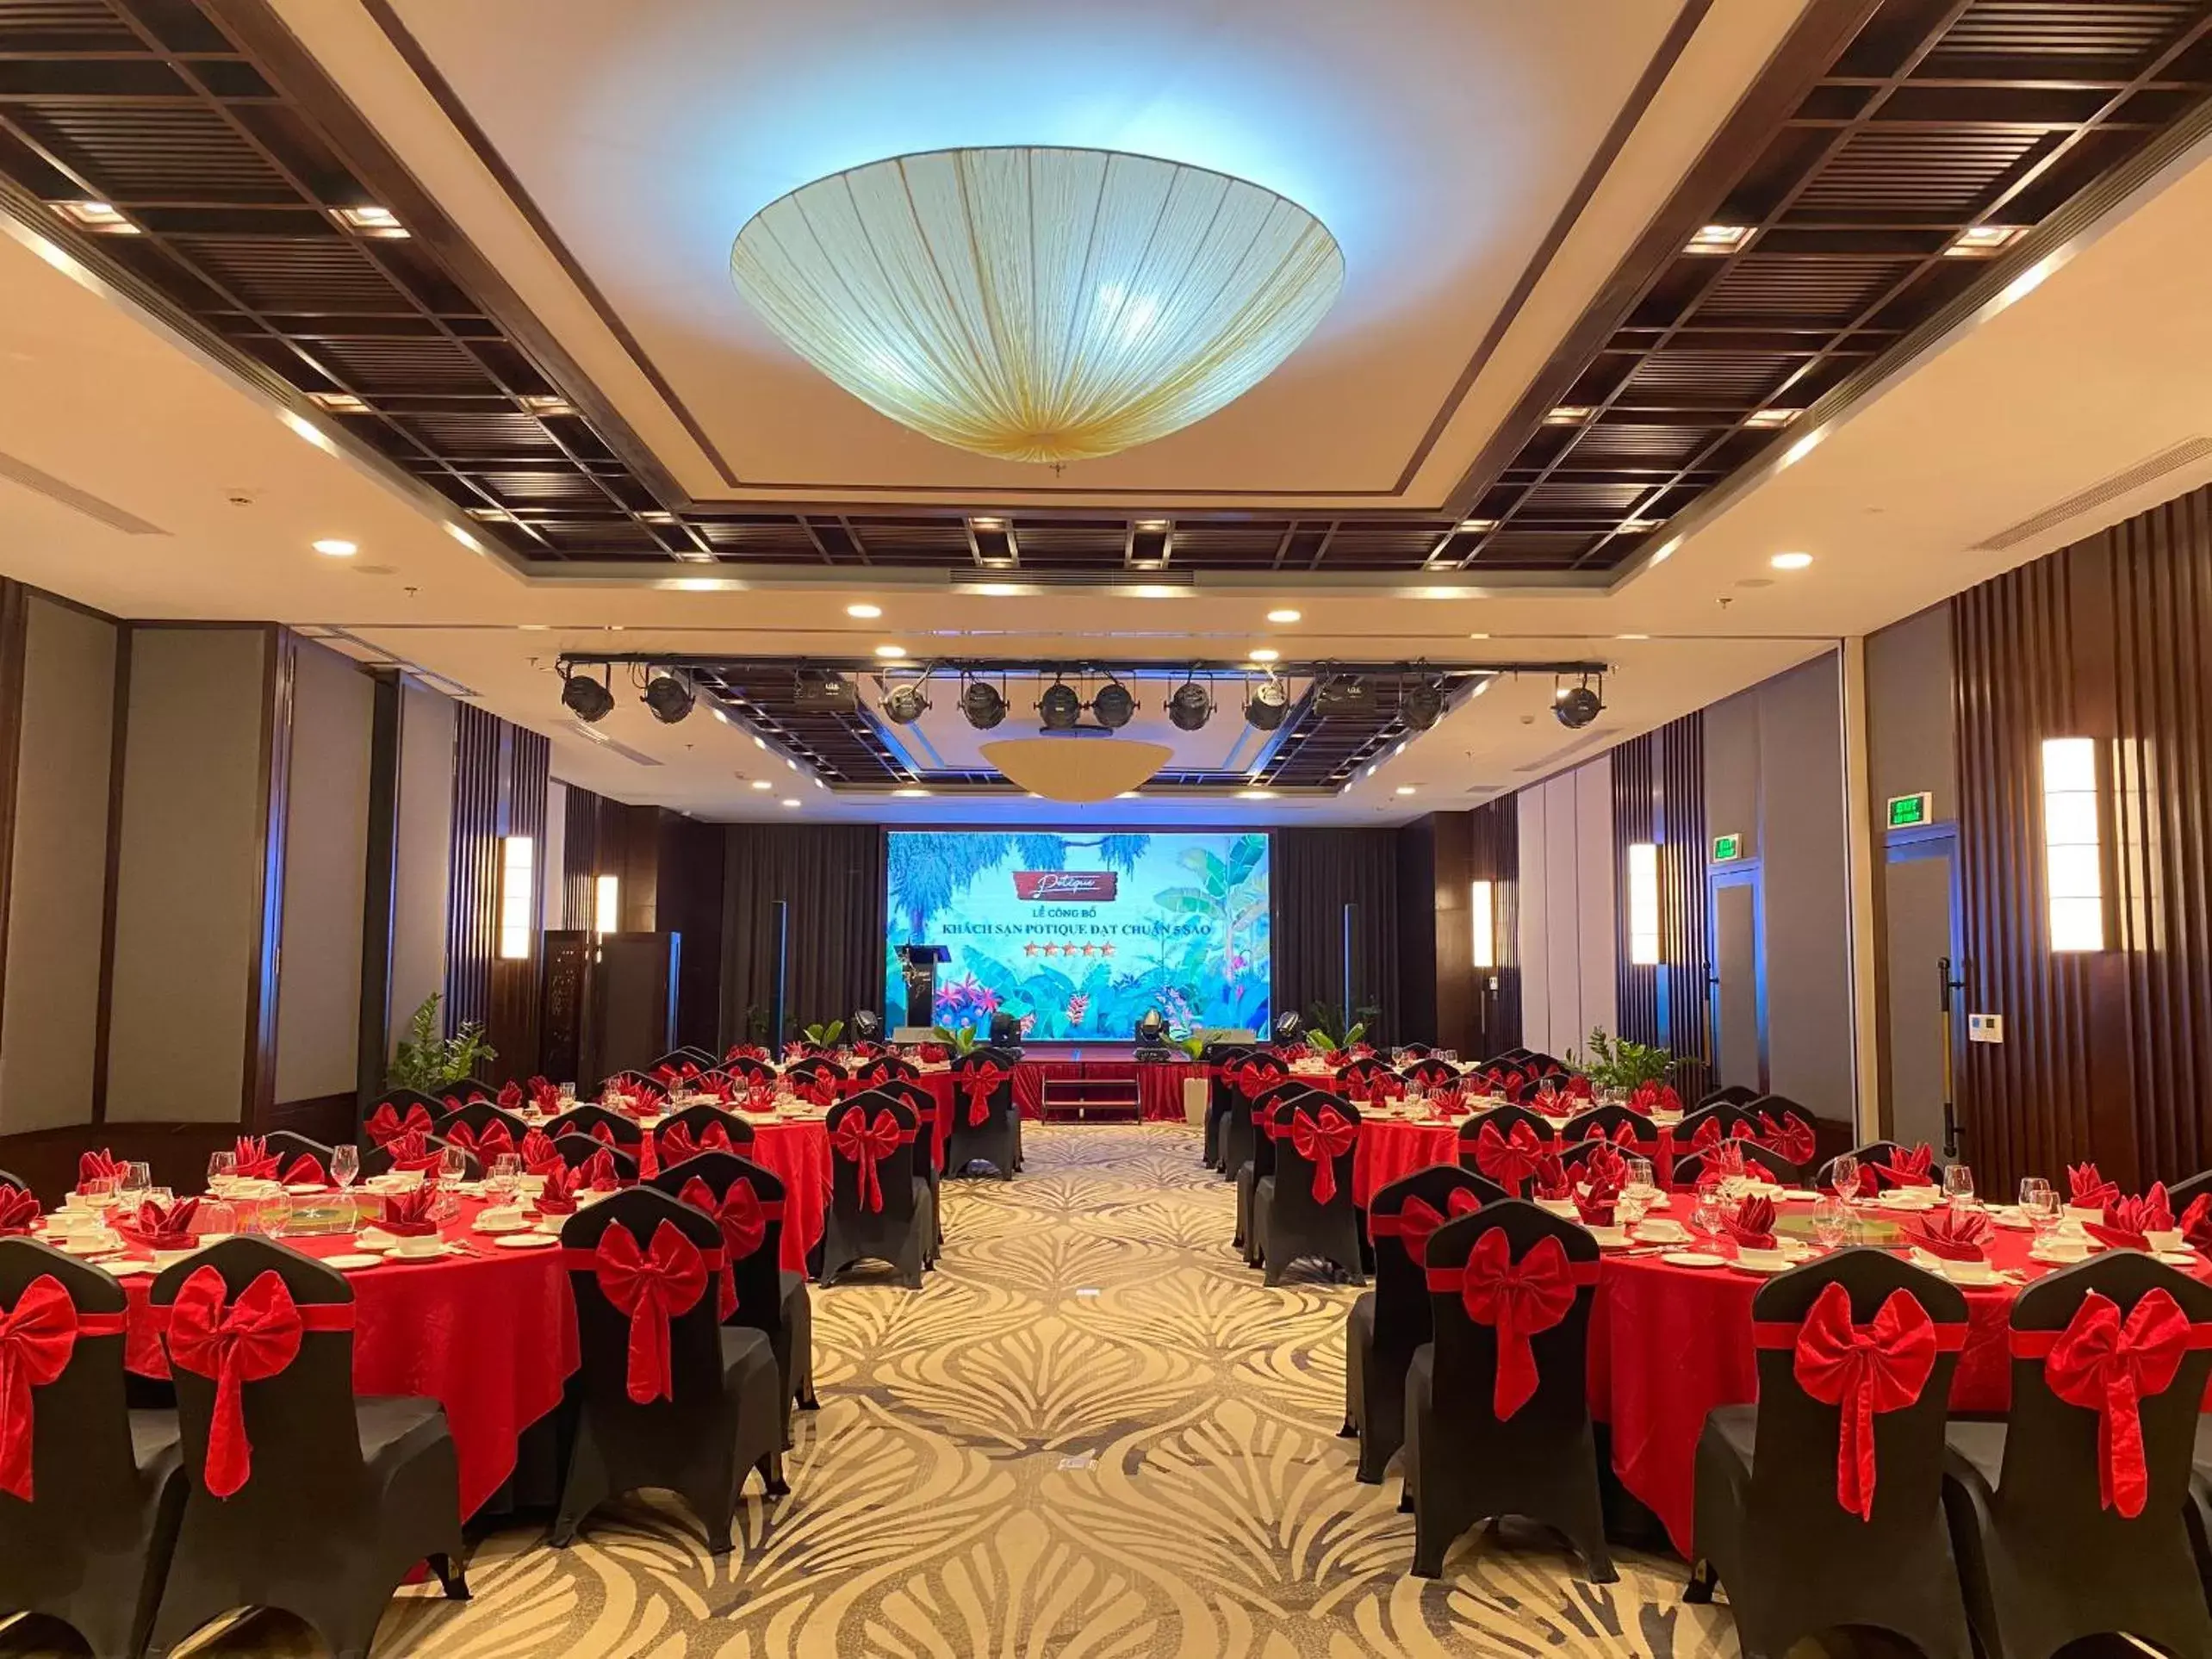 Meeting/conference room, Banquet Facilities in Potique Hotel